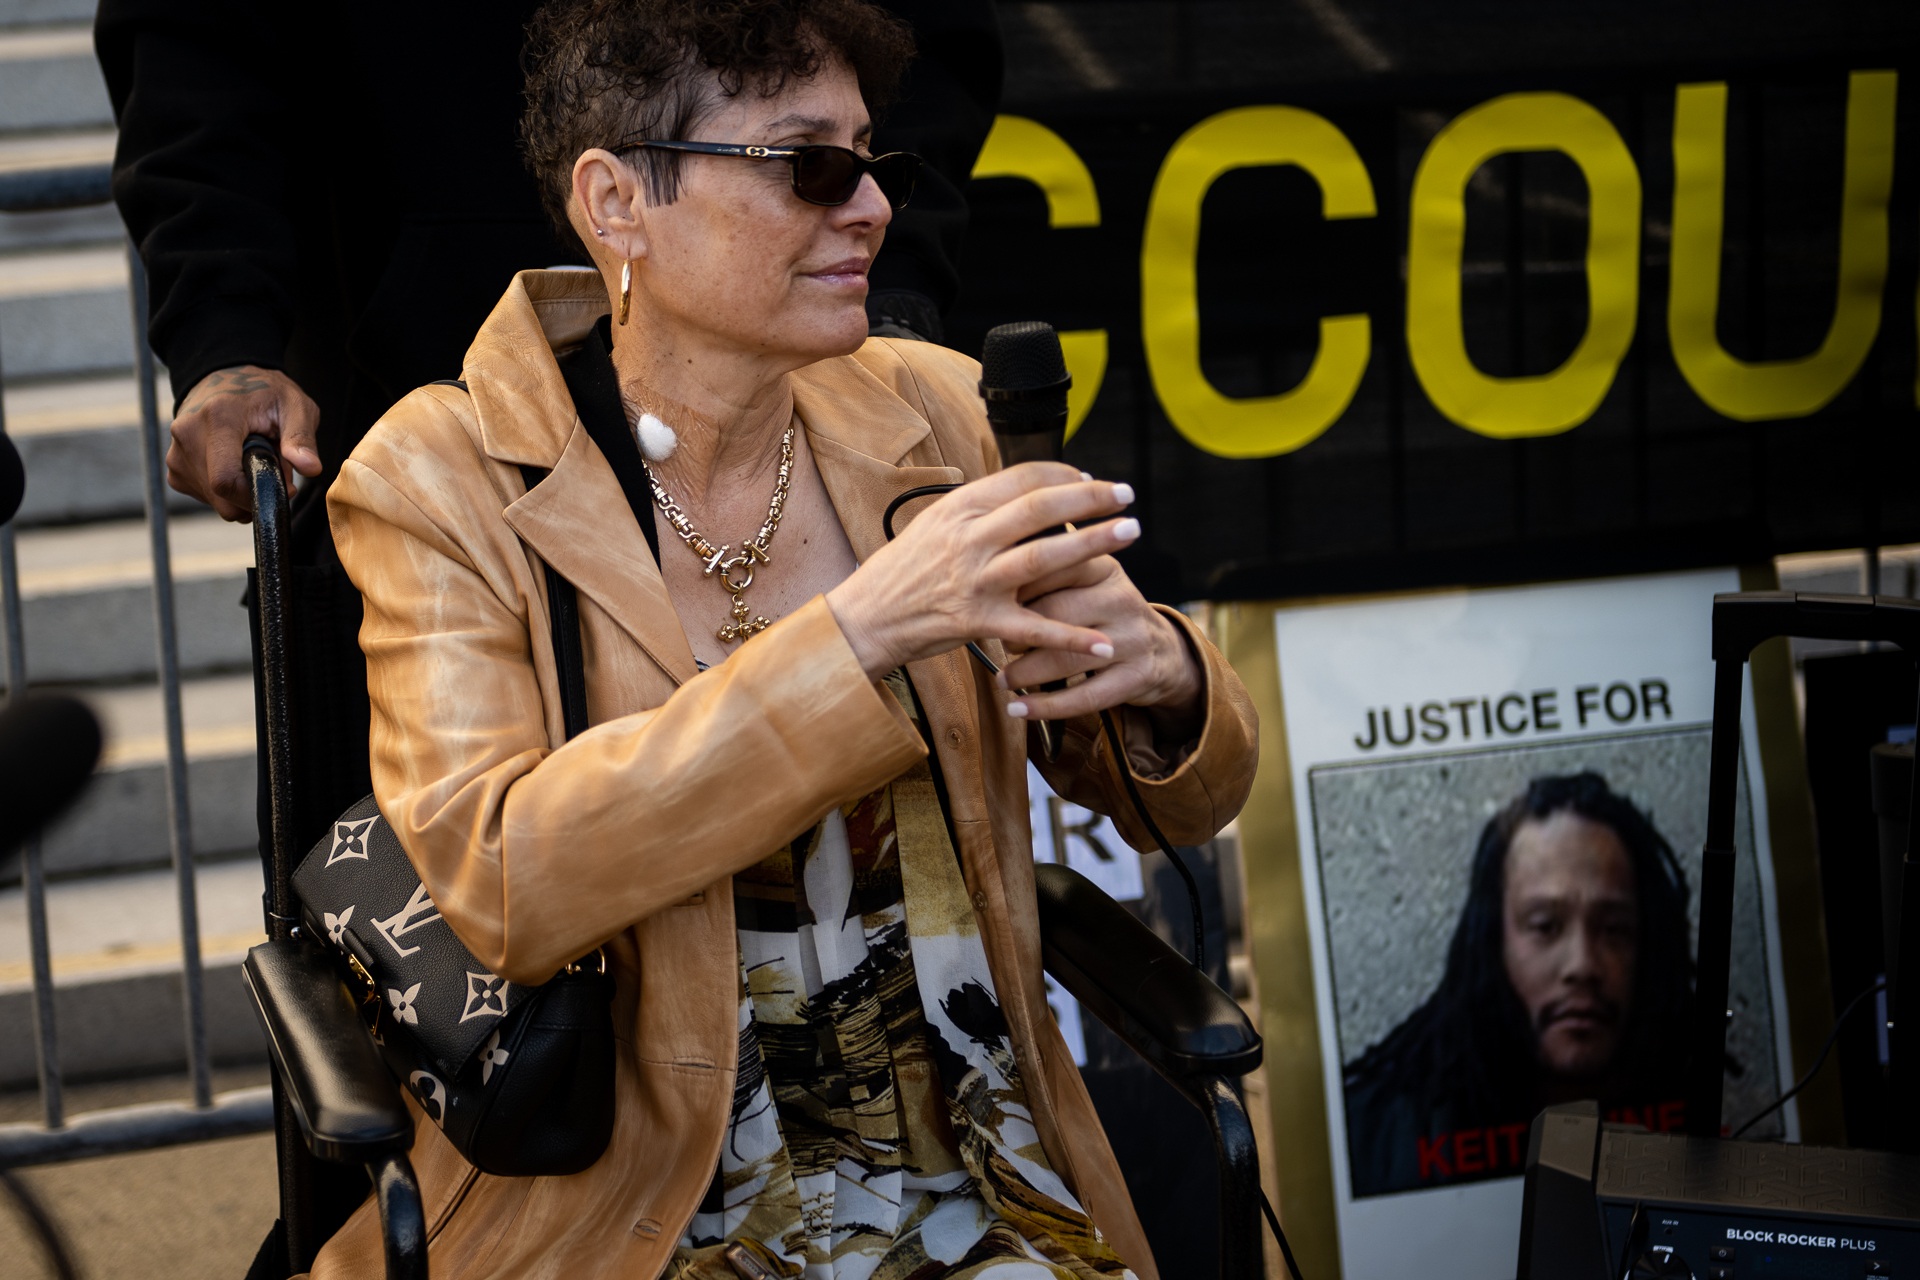 A middle-aged woman with light, freckled skin and short dark hair is seated in a wheelchair holding a microphone, next to a photo of a Black man with long black locs. The woman wears a beige leather jacket and a patterned matching blouse, with gold earrings and a necklace.